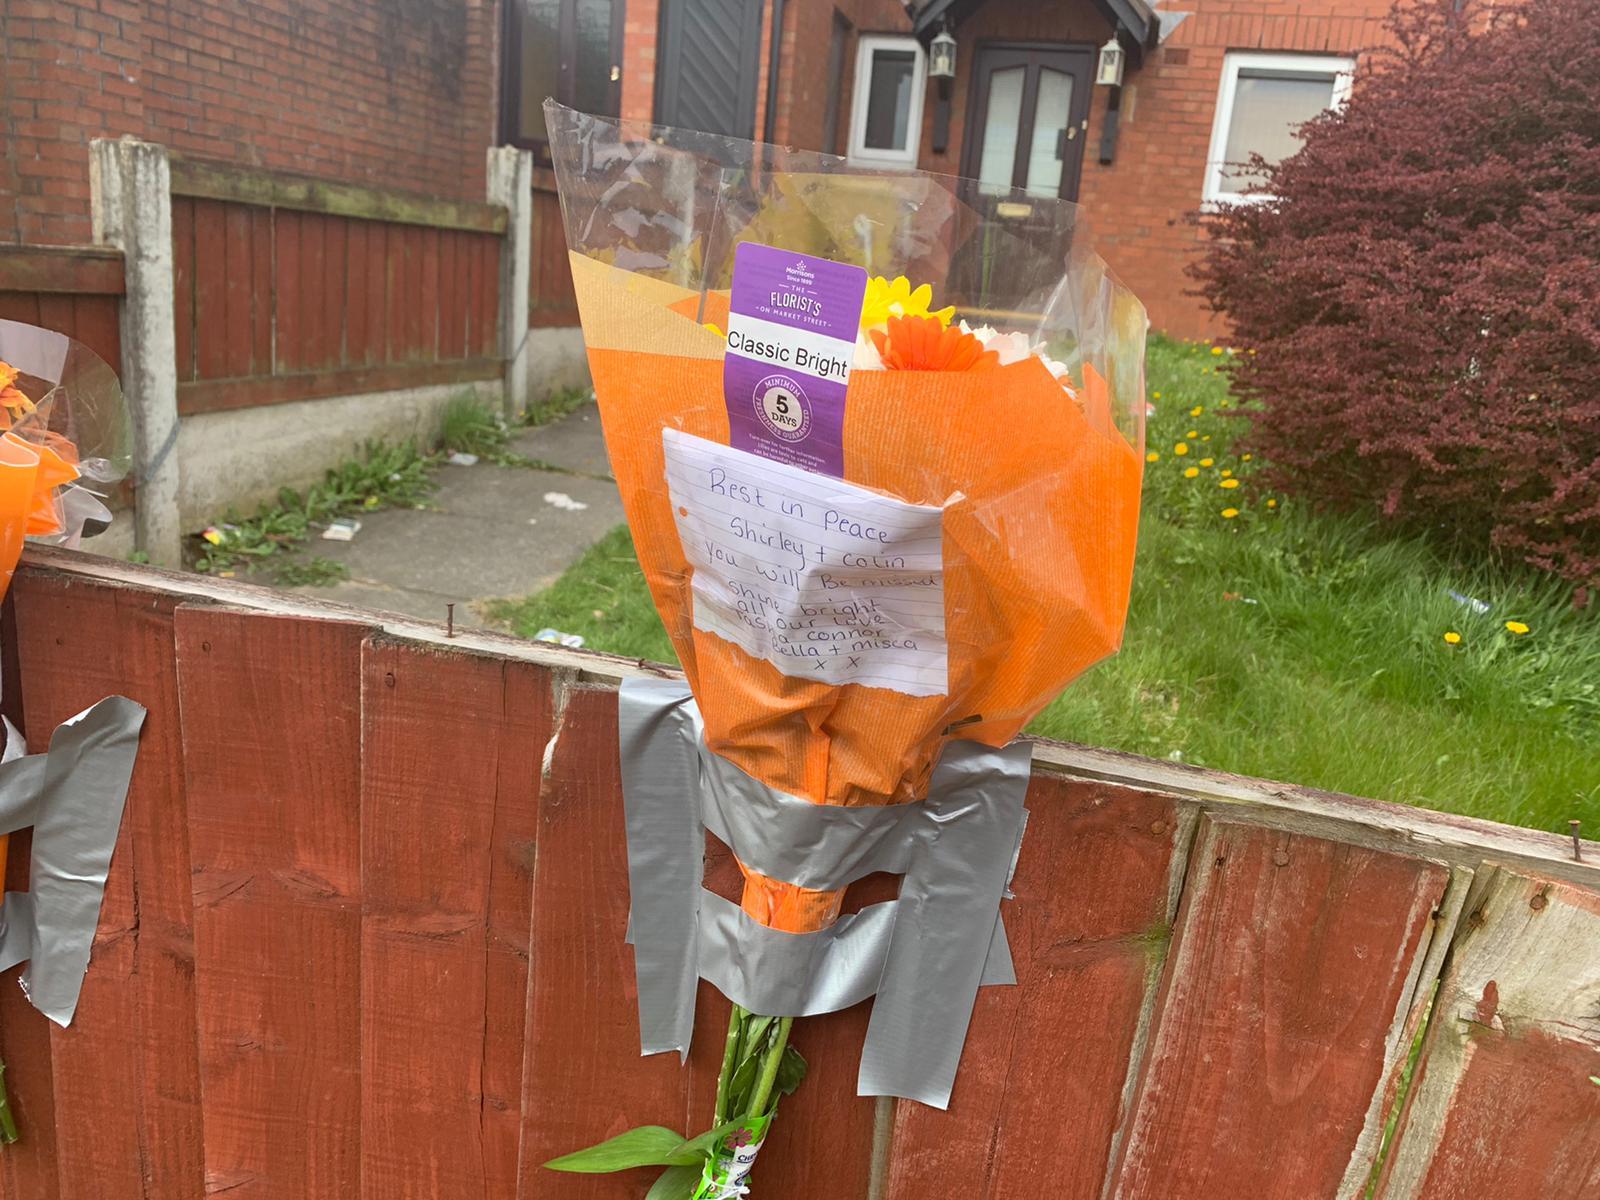 Floral tributes left outside the house on Mersey Street